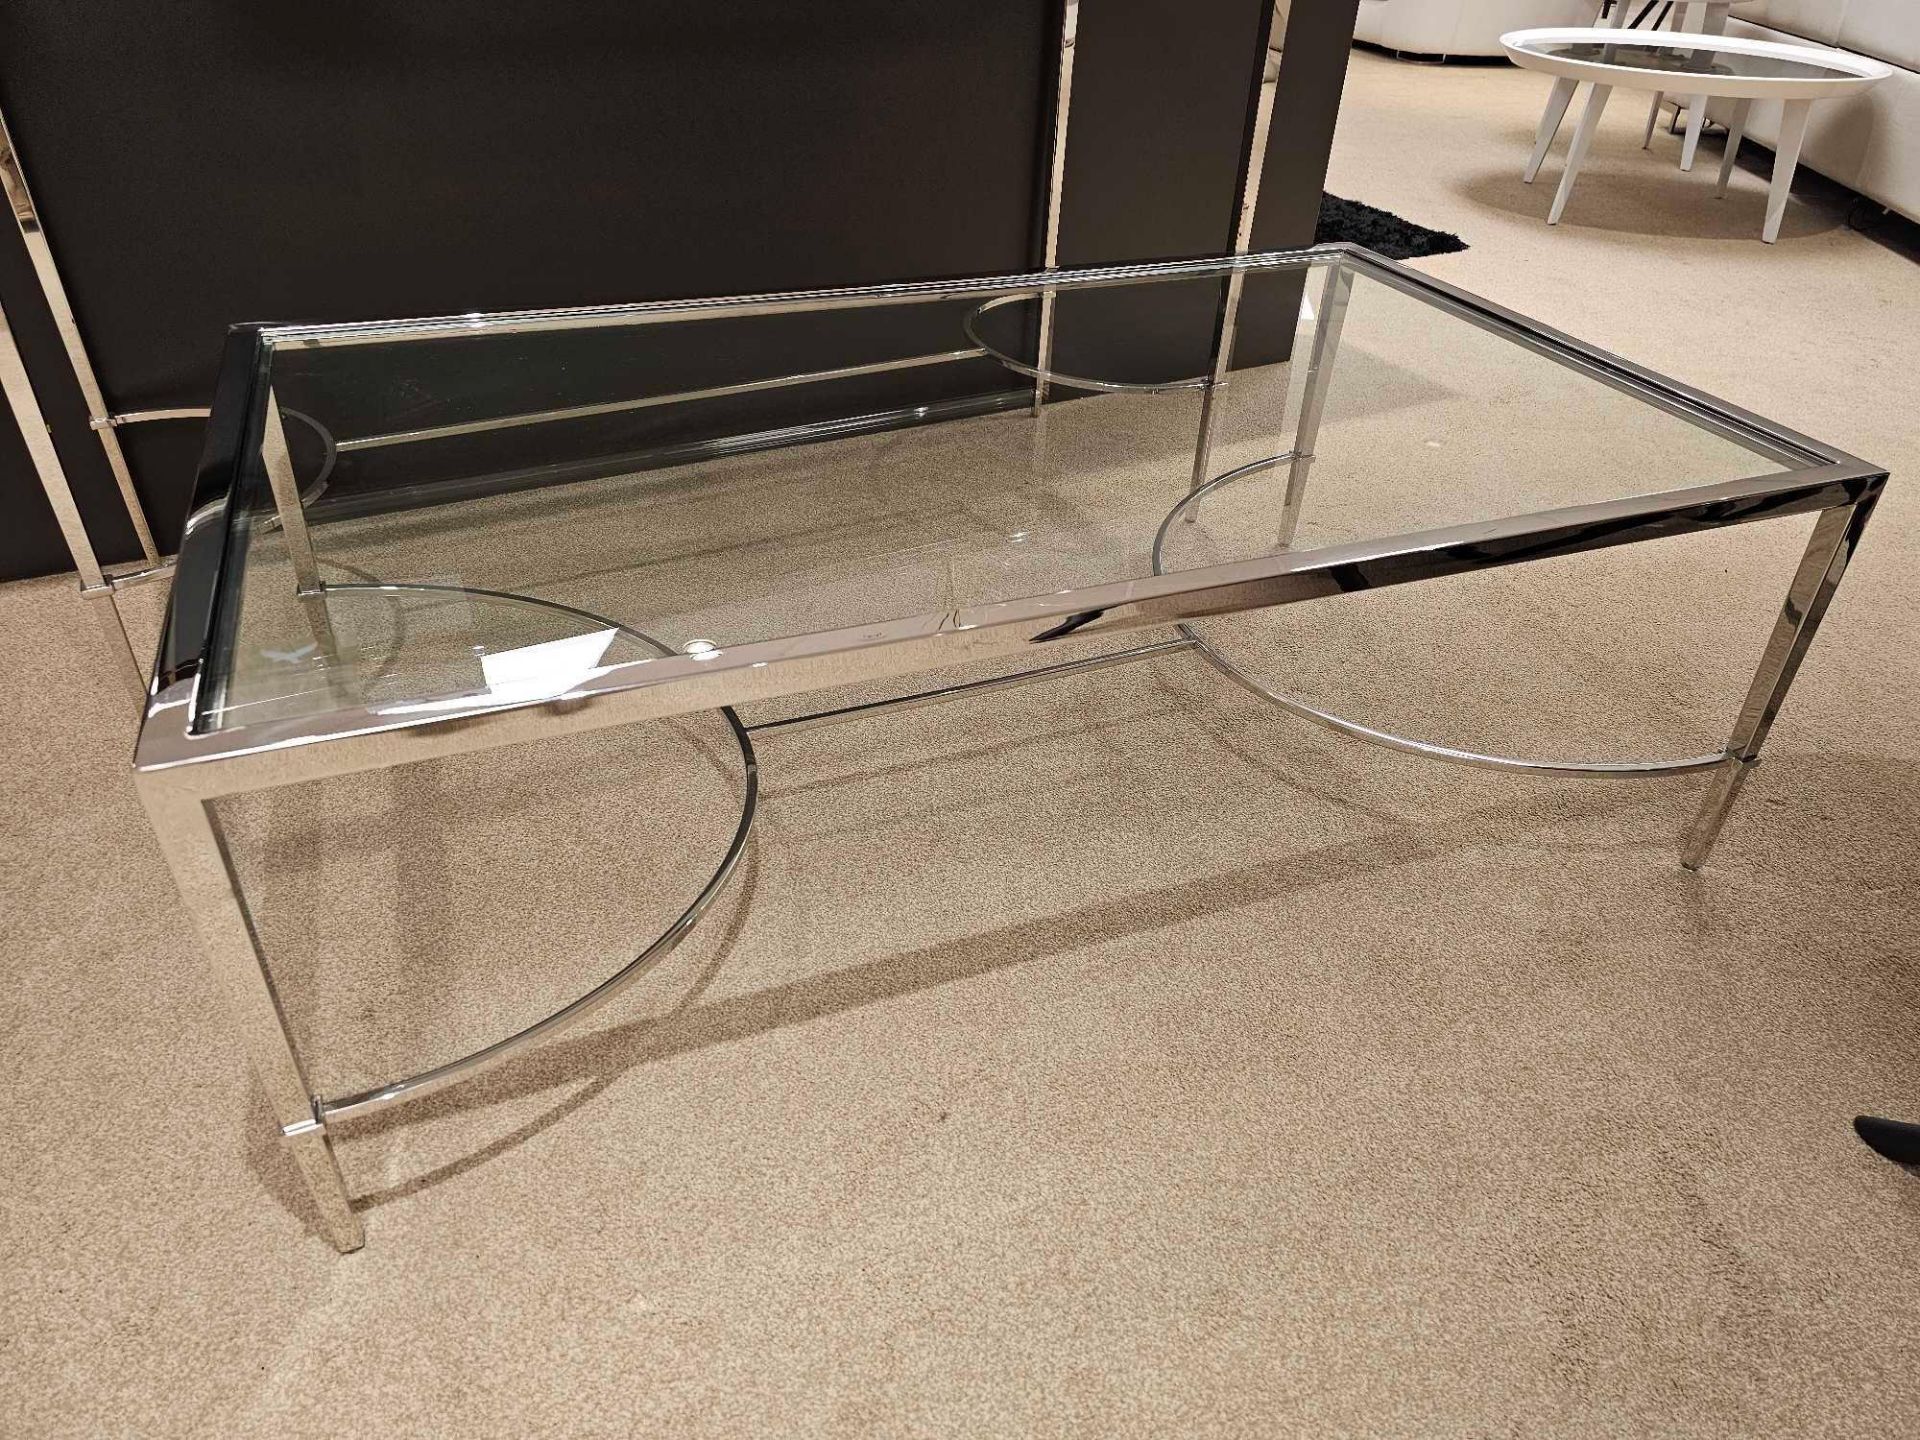 Tokyo Coffee Table by Kesterport The Tokyo coffee table with its clear glass top and a refined